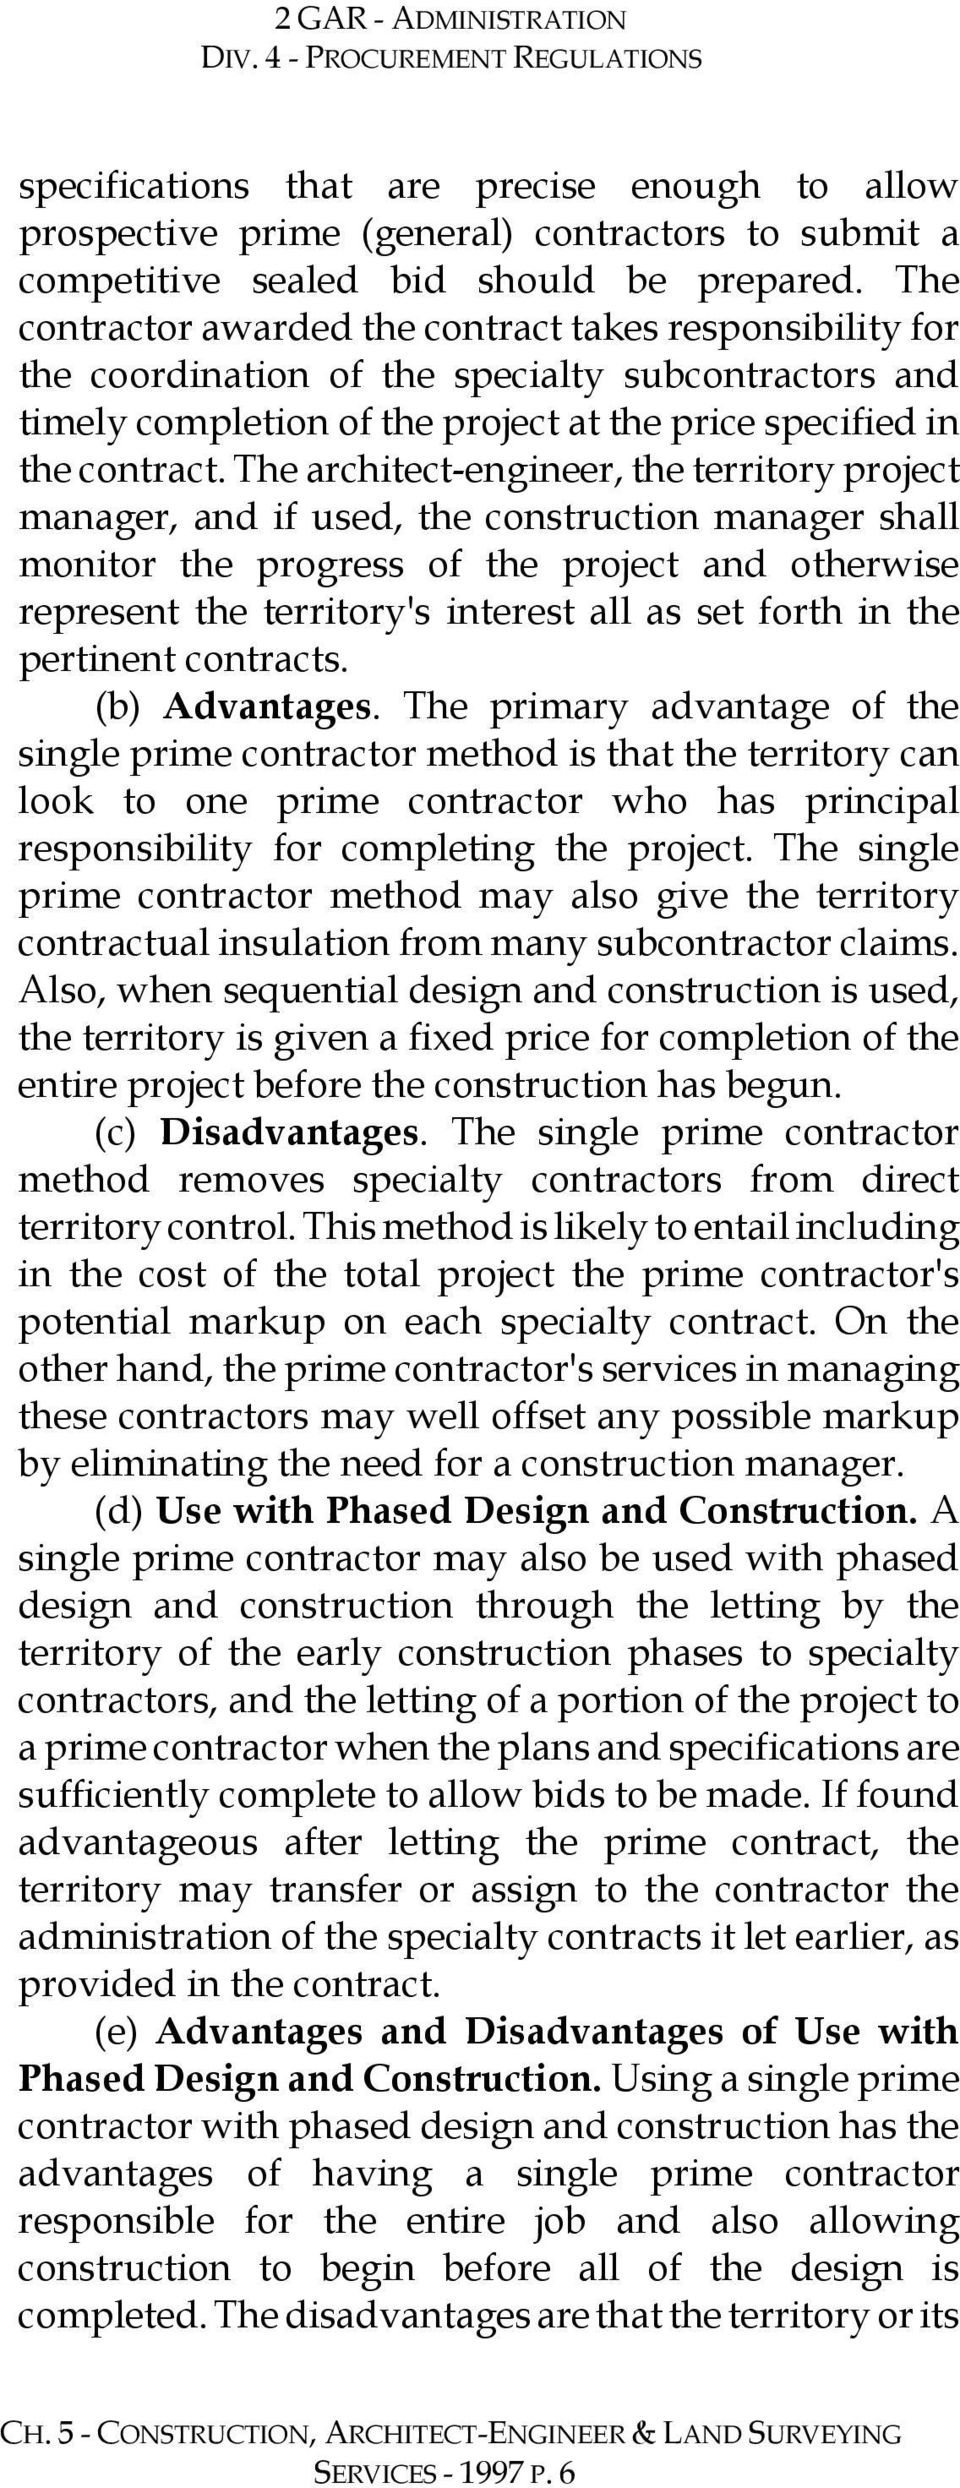 The architect-engineer, the territory project manager, and if used, the construction manager shall monitor the progress of the project and otherwise represent the territory's interest all as set